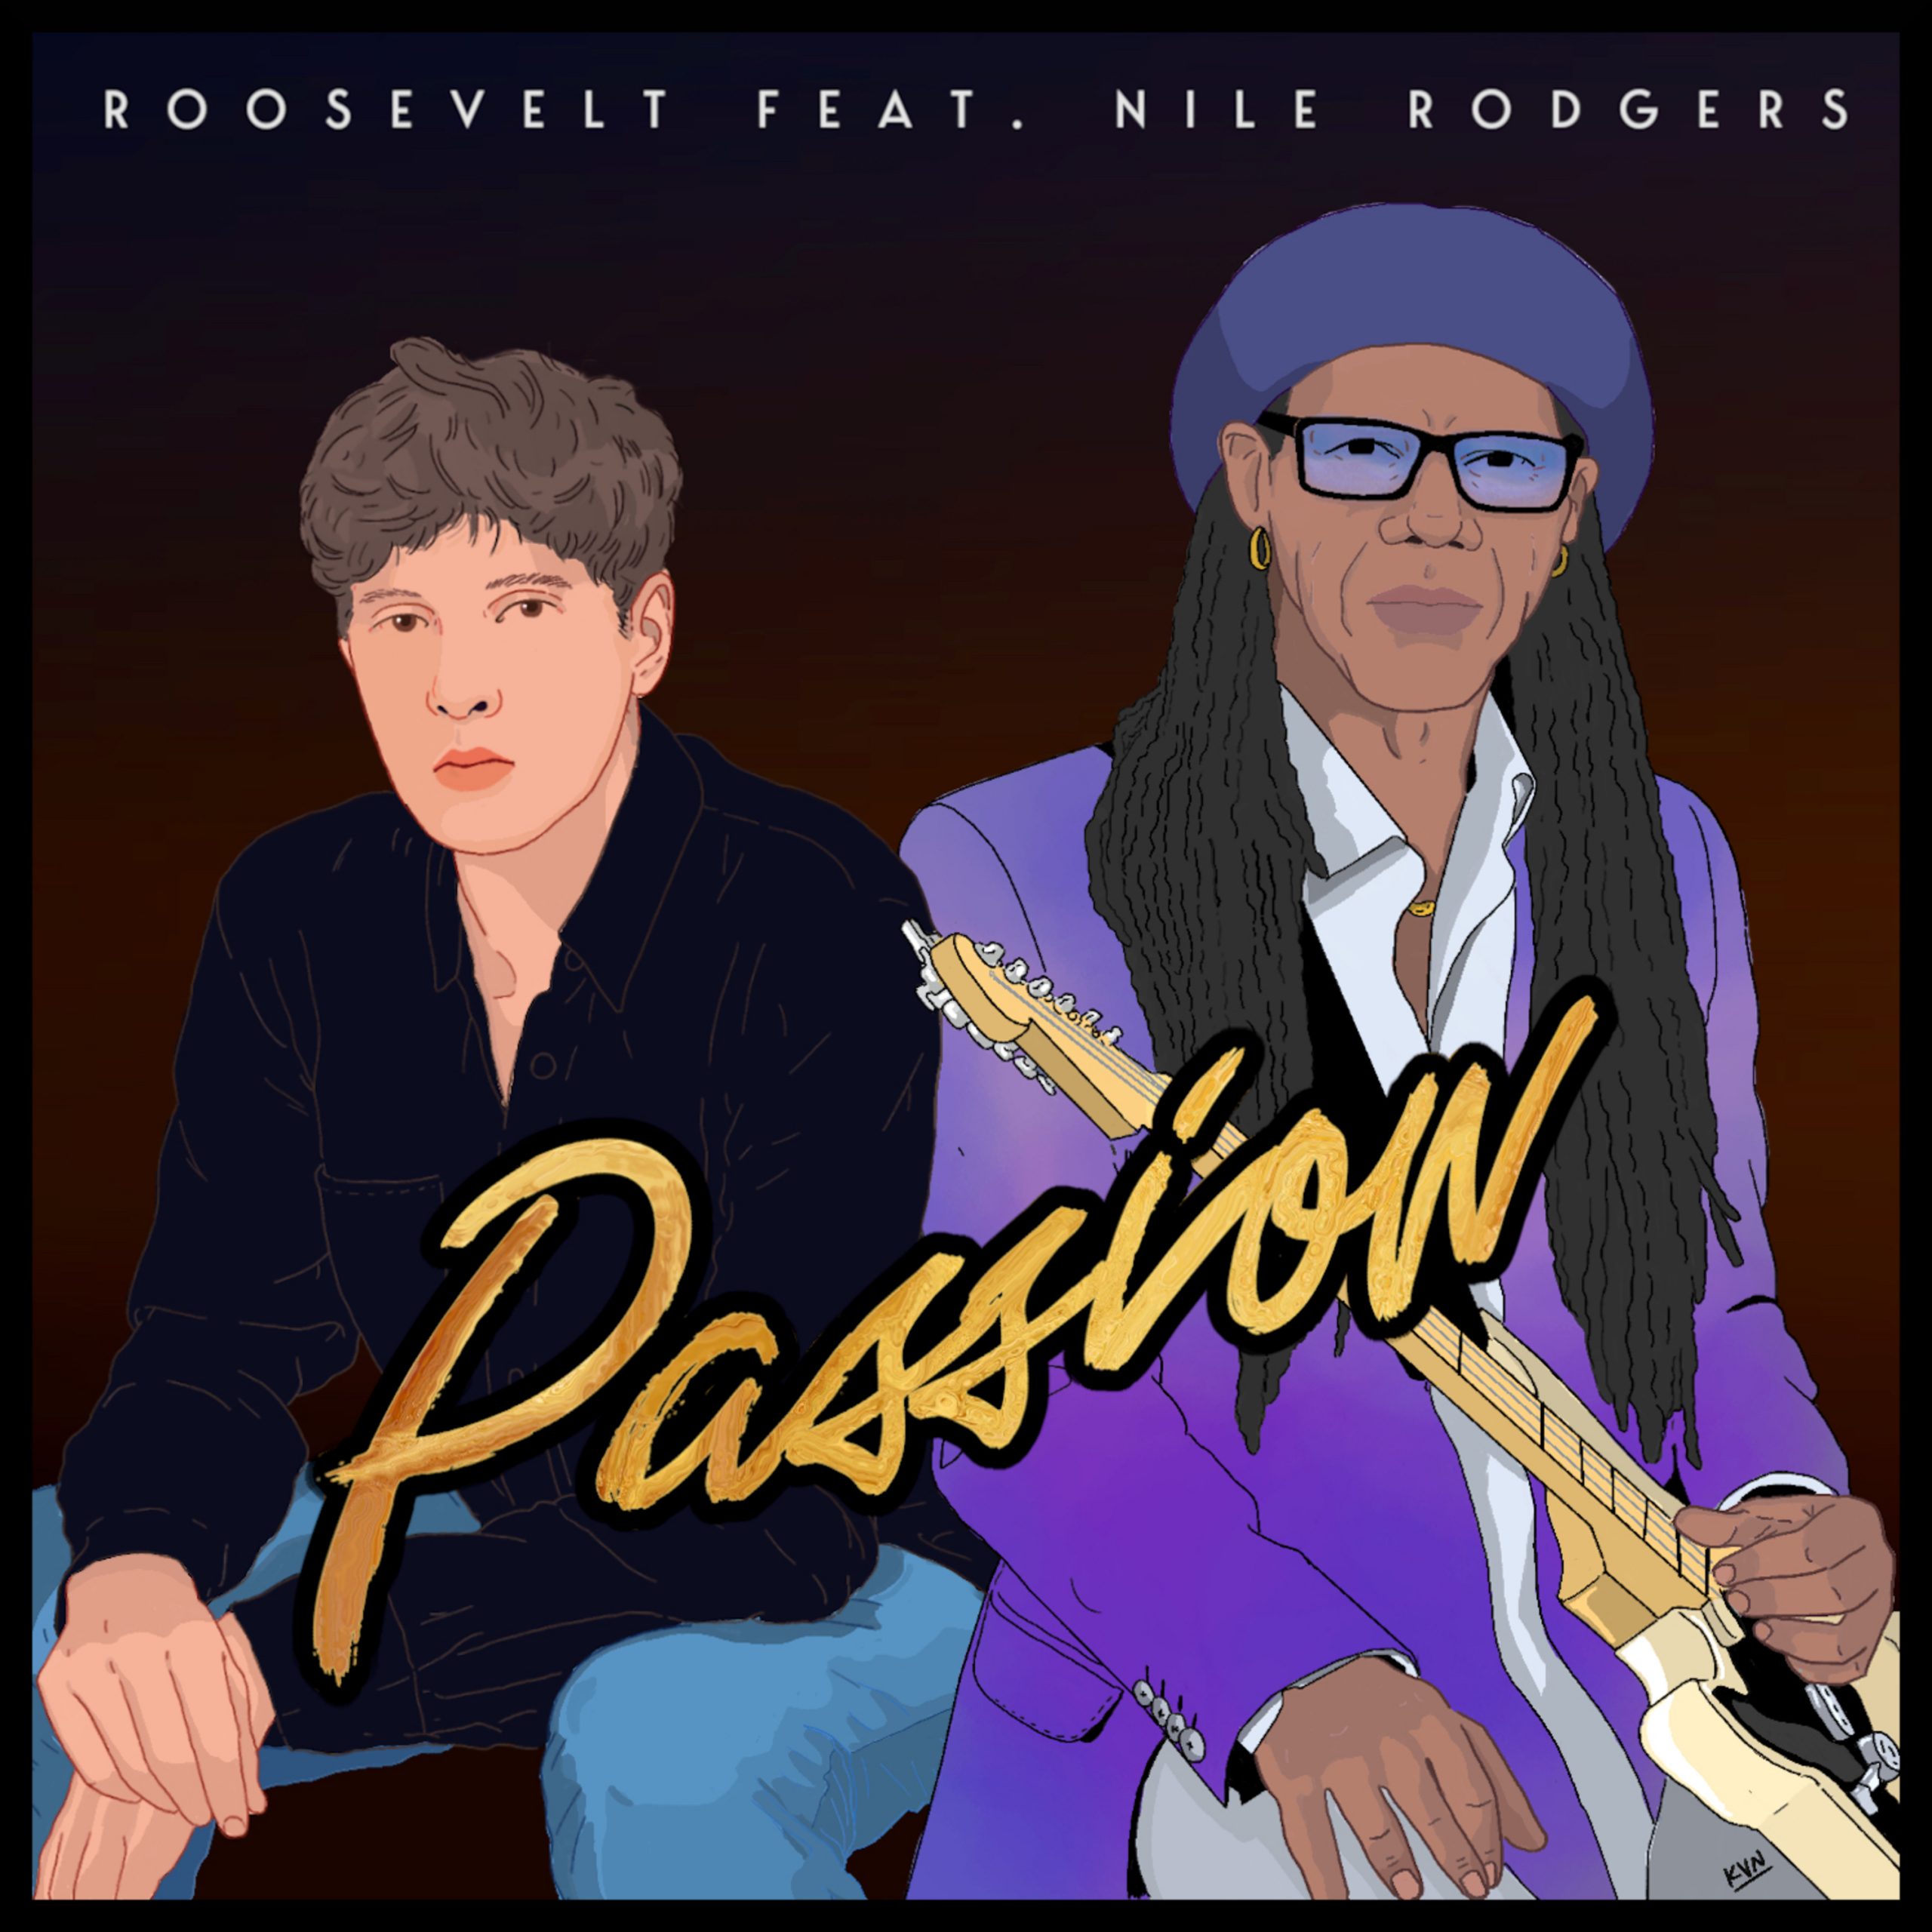 Roosevelt ft. featuring Nile Rodgers Passion cover artwork